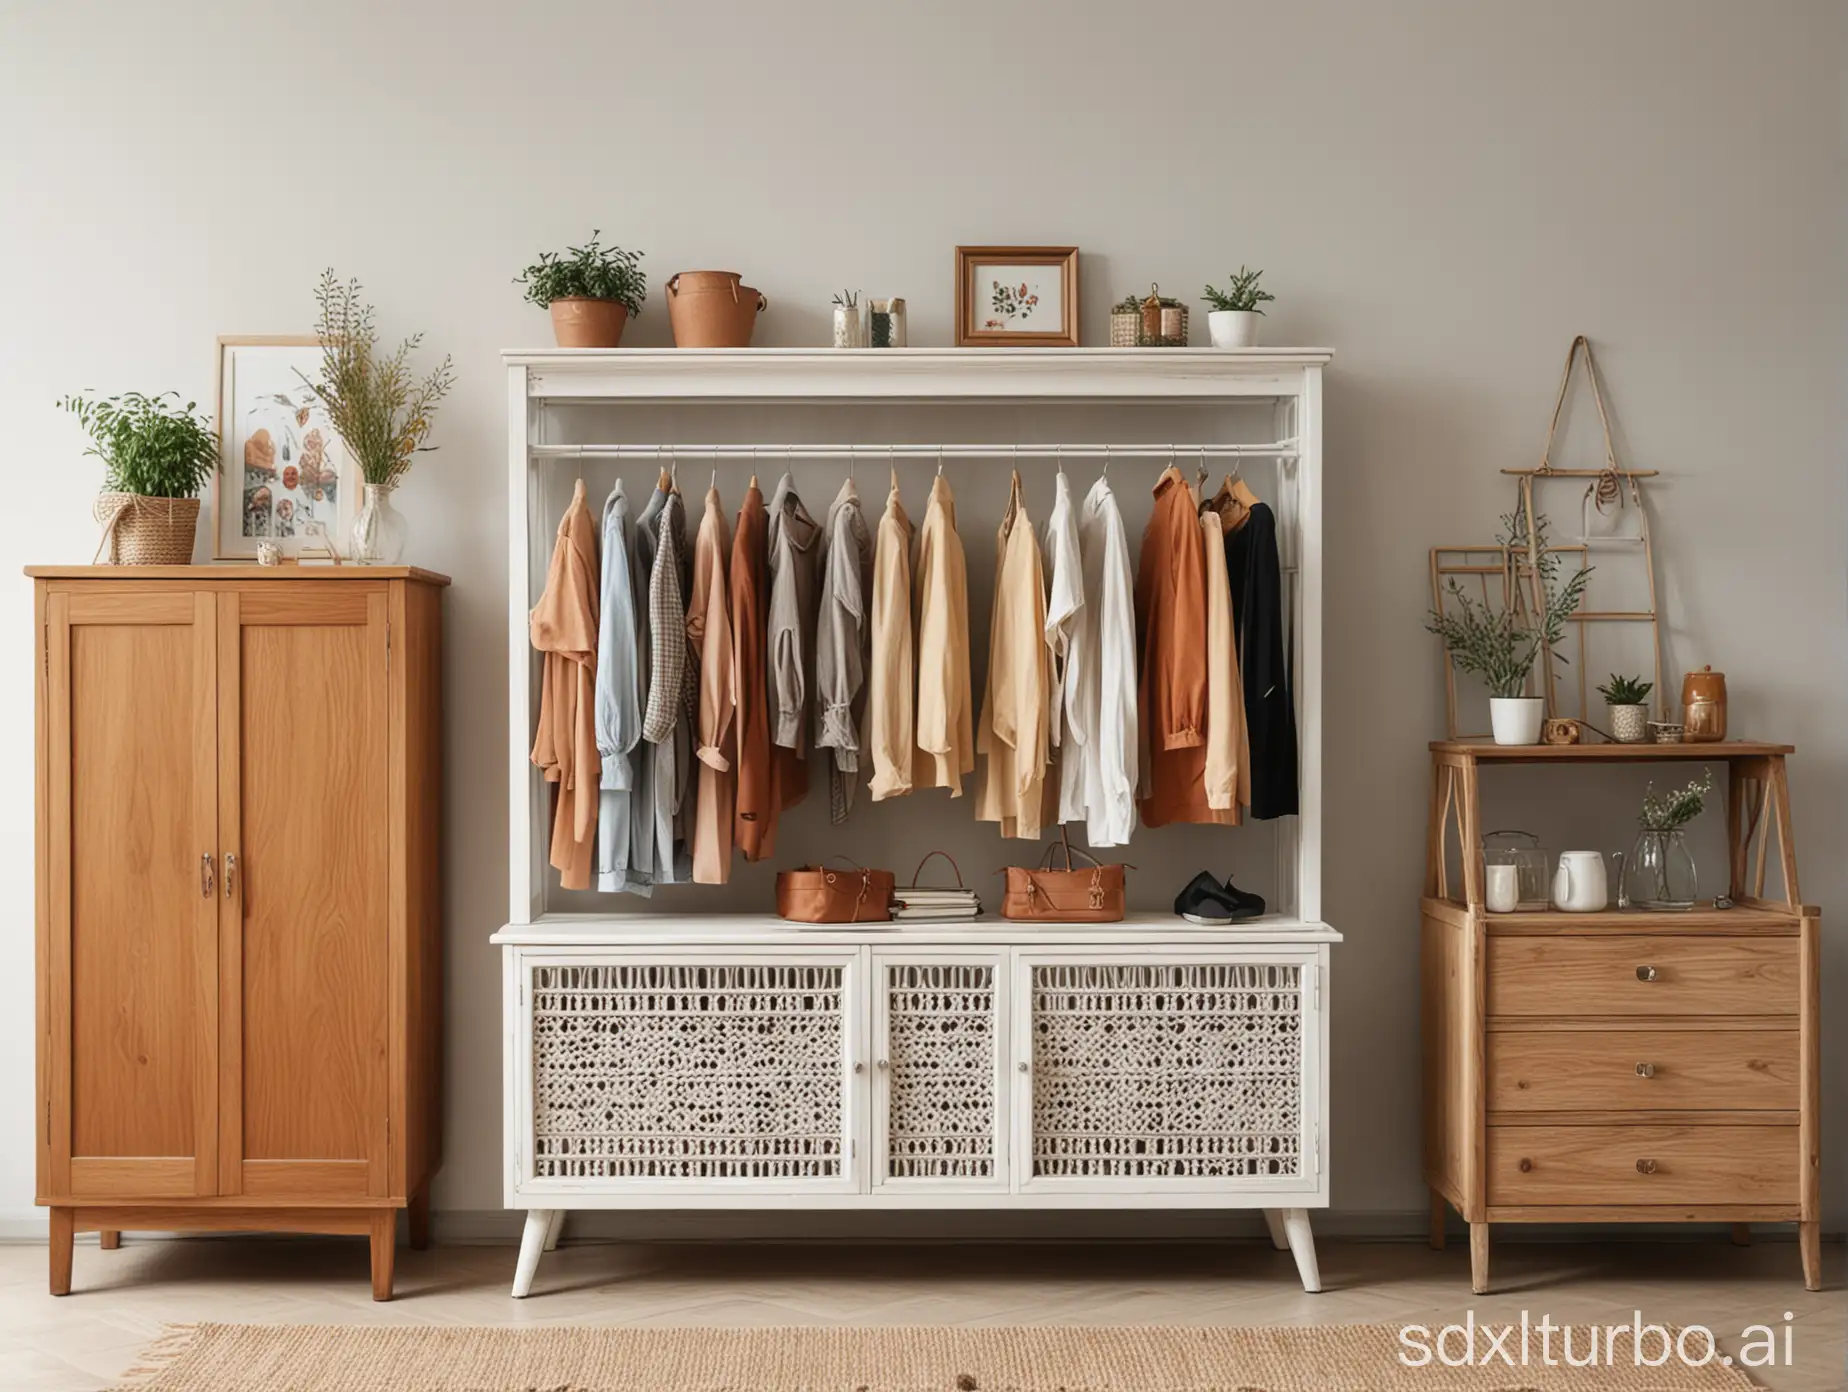 Cozy-SecondHand-Store-Display-Used-Clothing-Decor-and-Cabinet